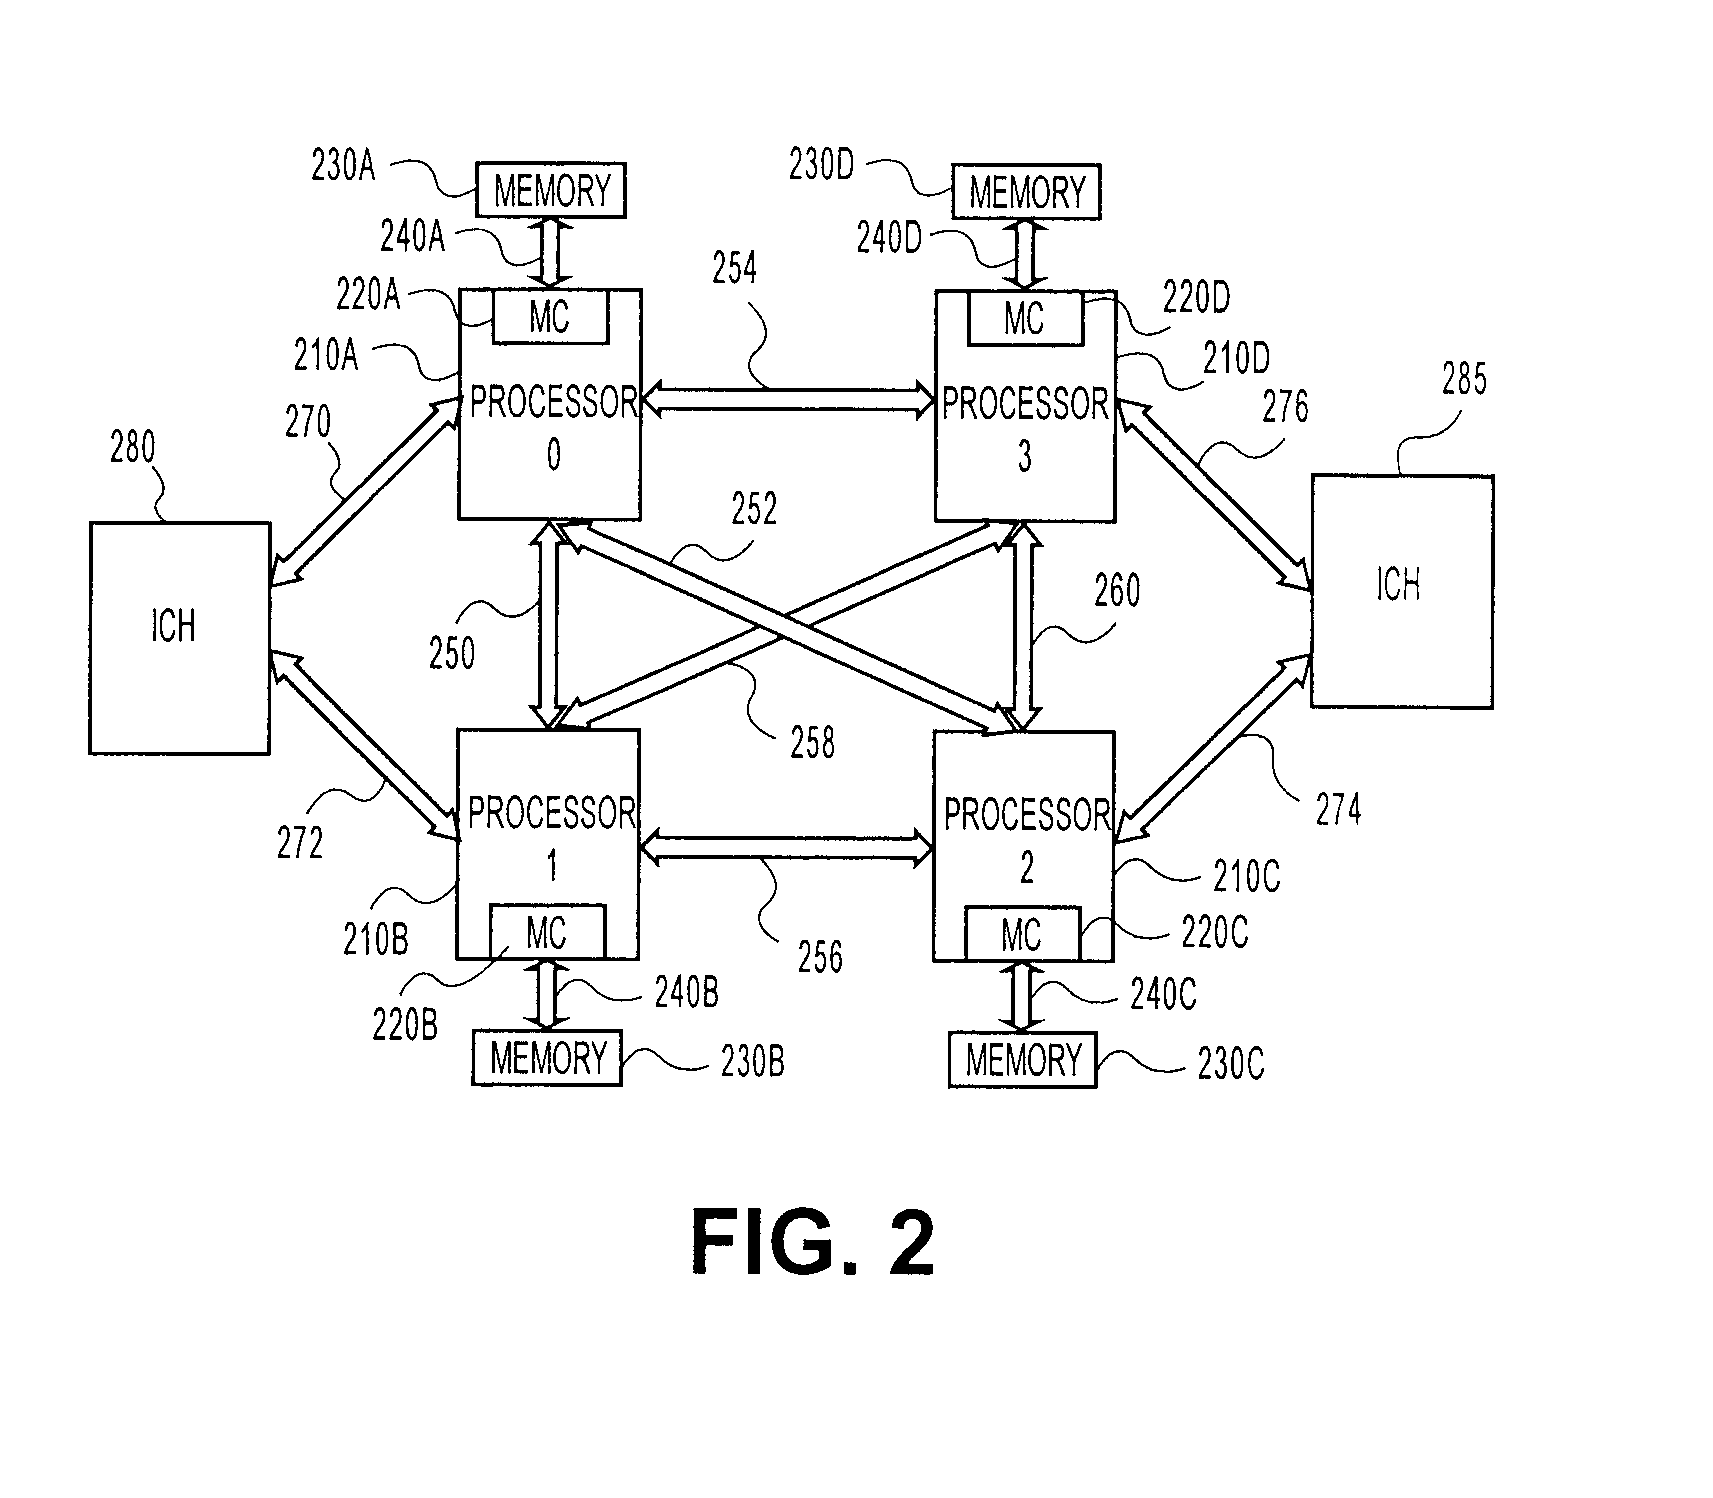 Method, system, and apparatus for a core activity detector to facilitate dynamic power management in a distributed system